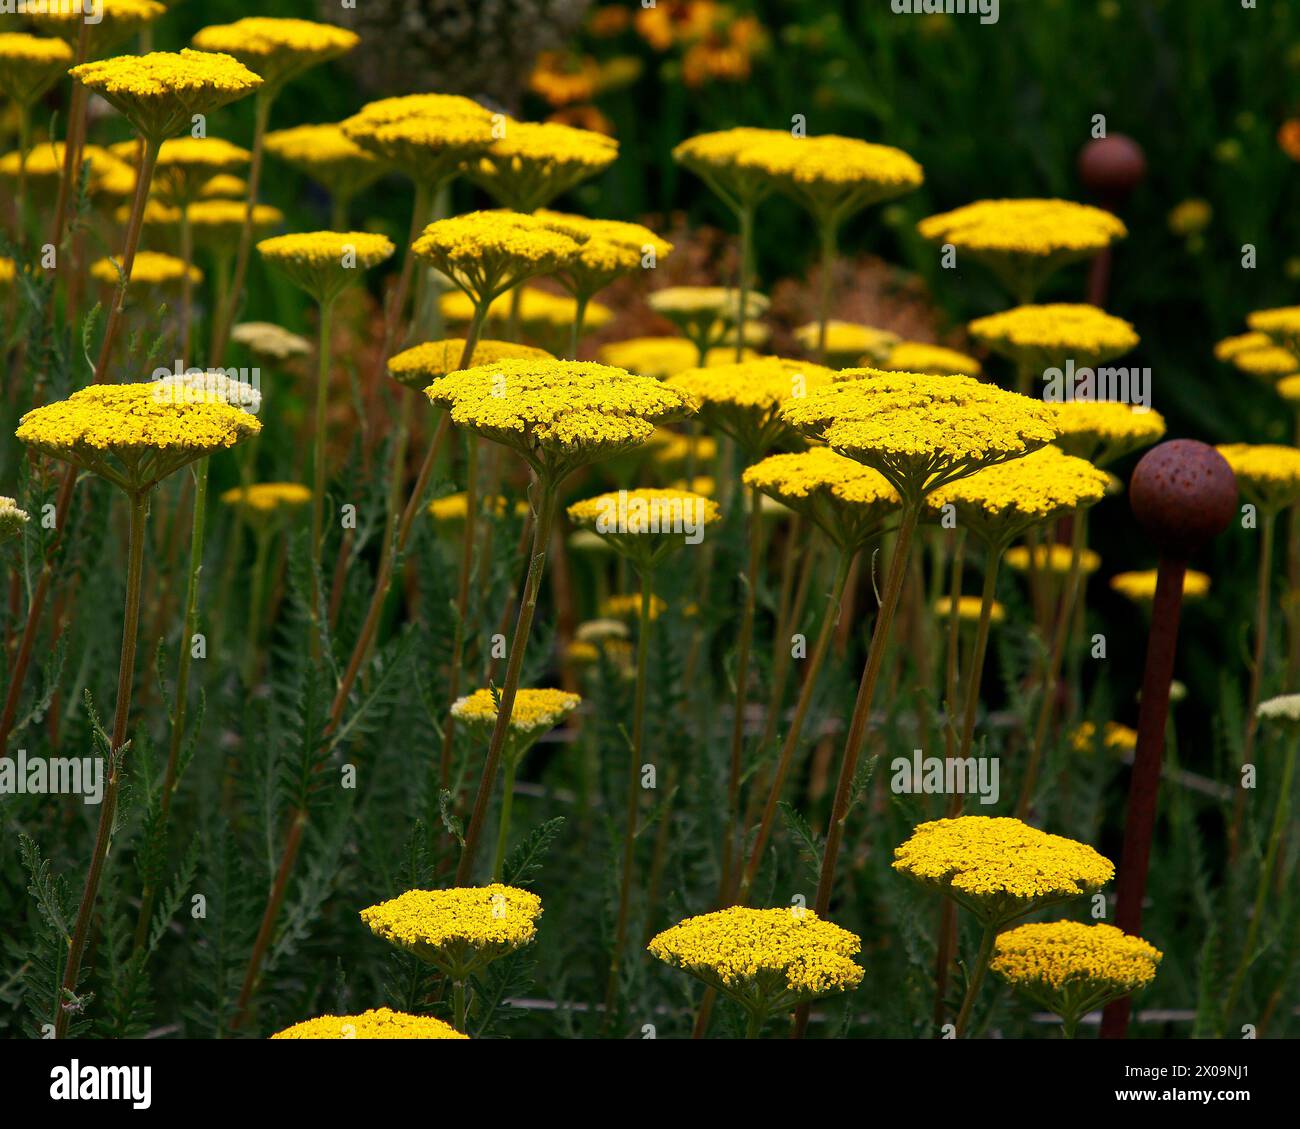 Closeup of the yellow flat flower heads of the herbaceous perennial garden plant Achillea filipendulina parker's variety. Stock Photo